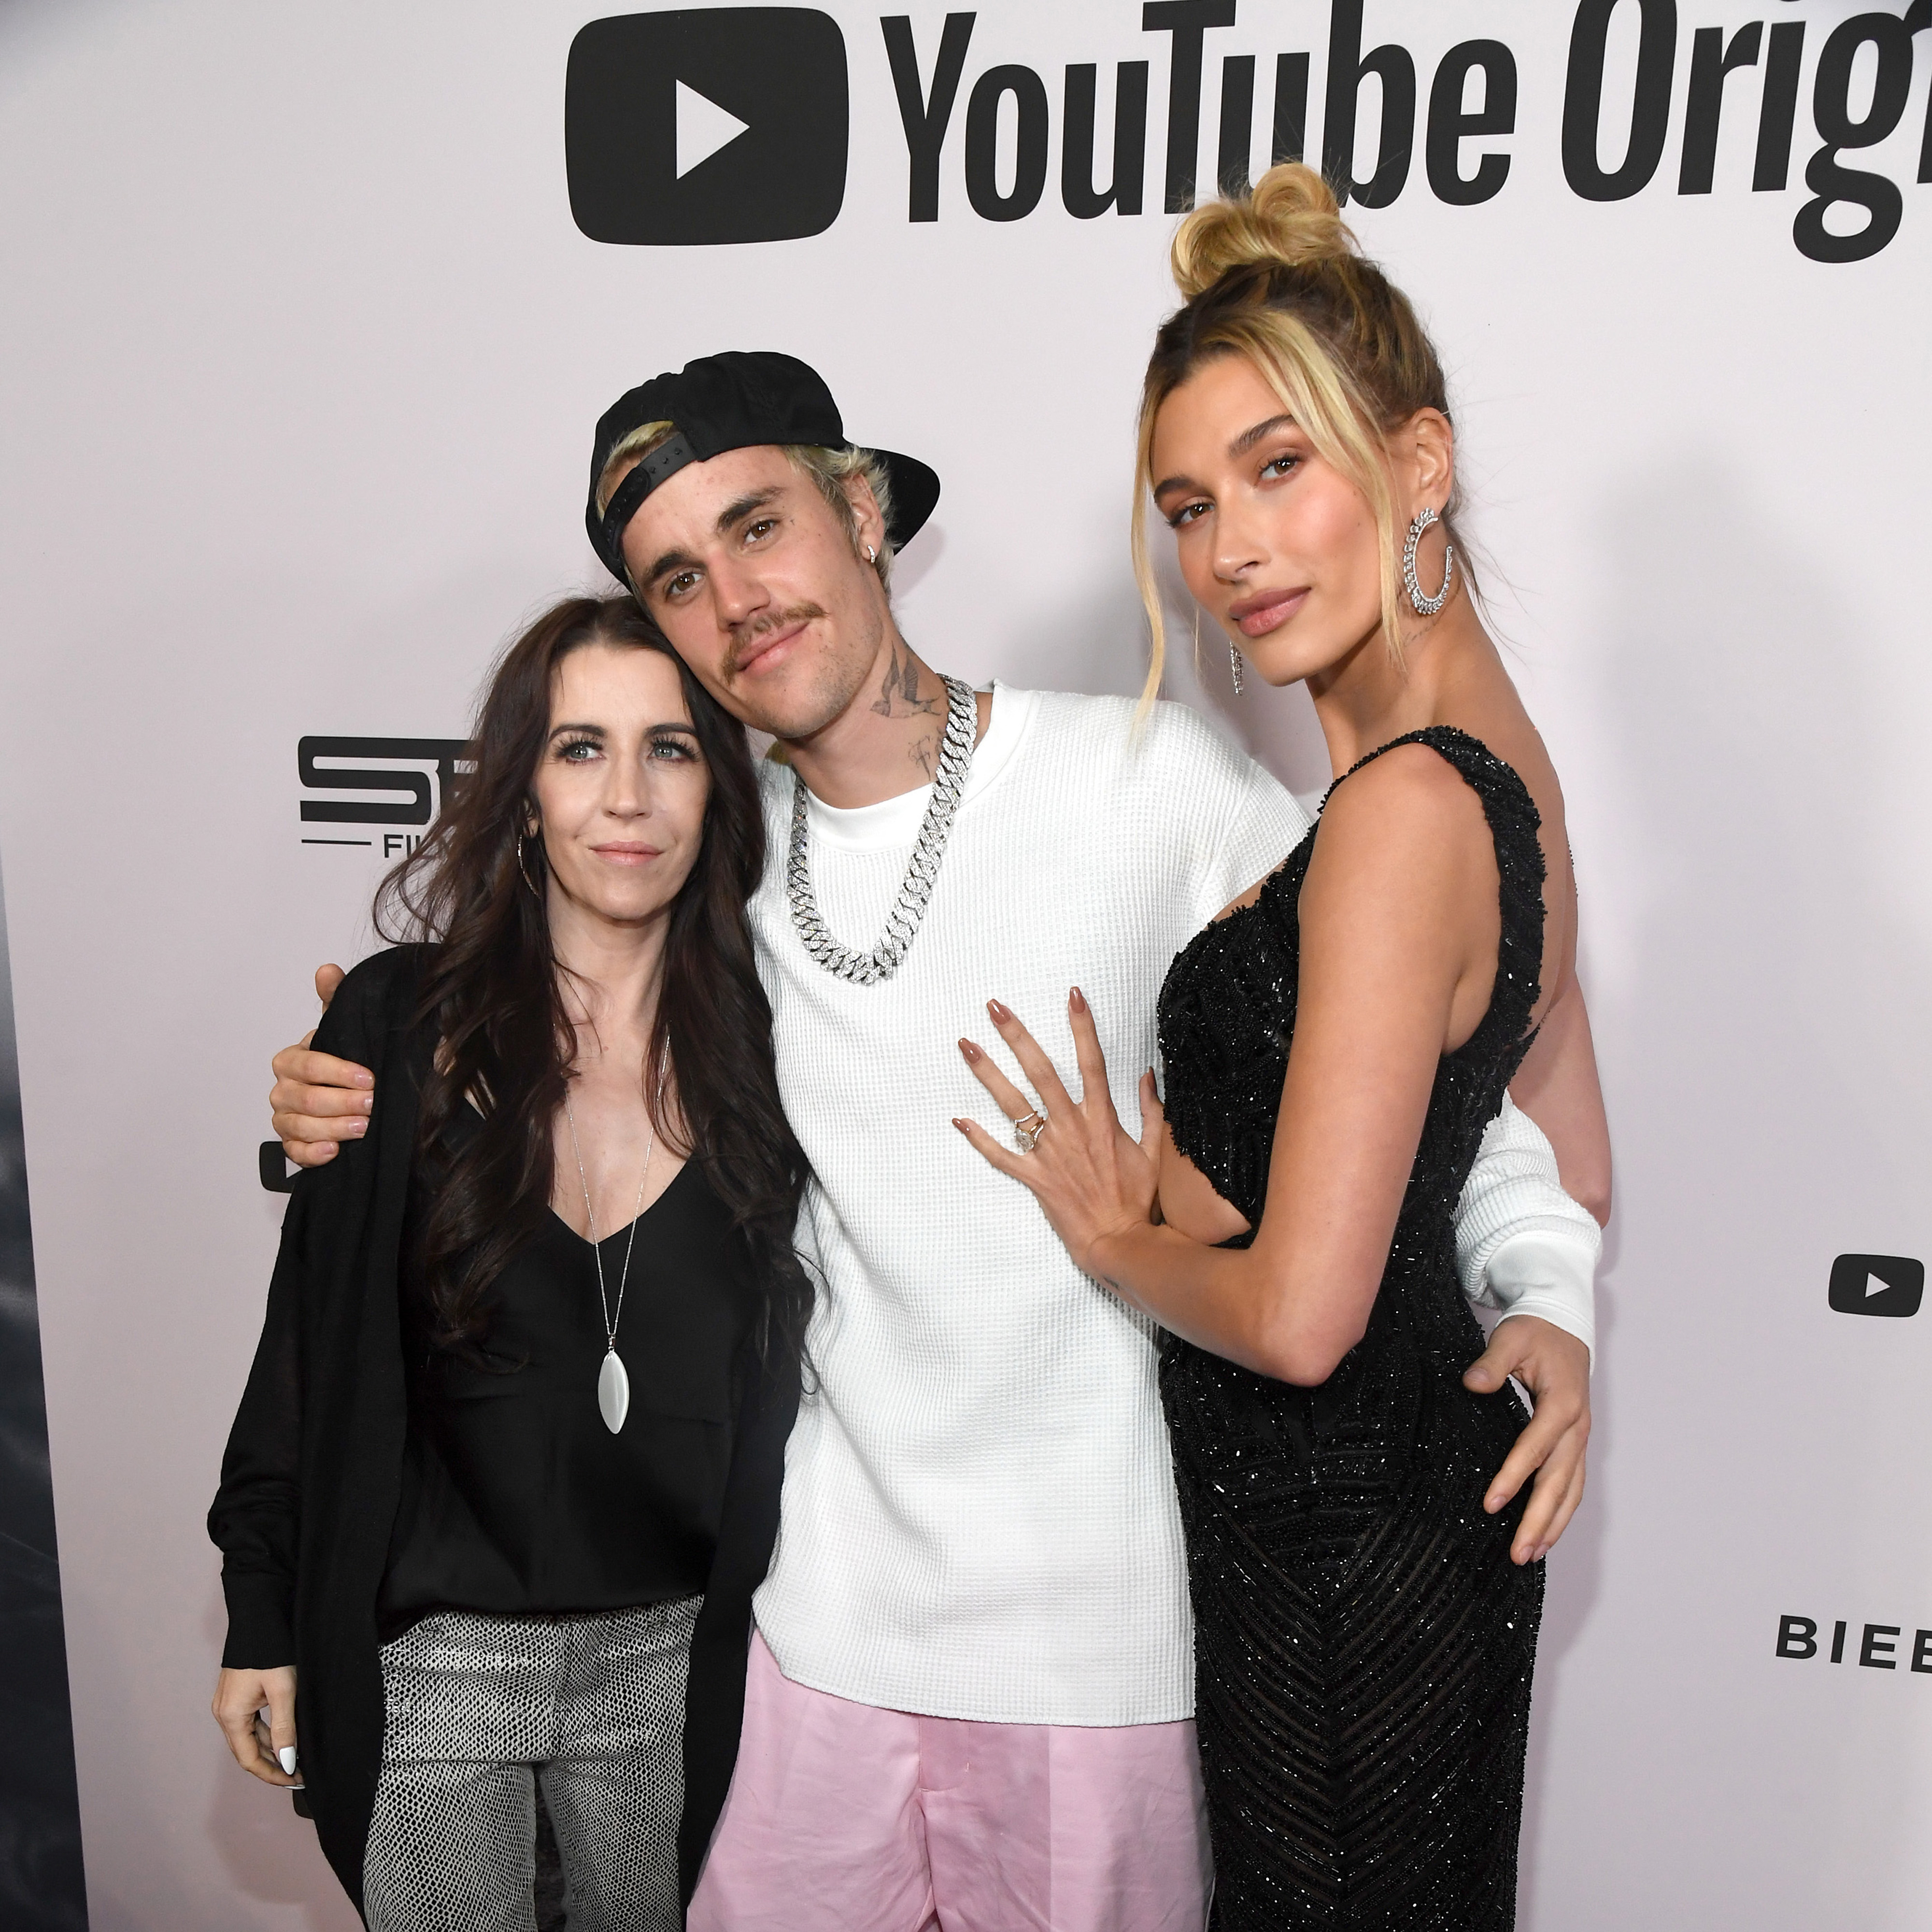 Hailey, pictured with her husband Justin and his mom Pattie, was recently accused of using Pattie's birthday as a way to cover up their marriage struggles